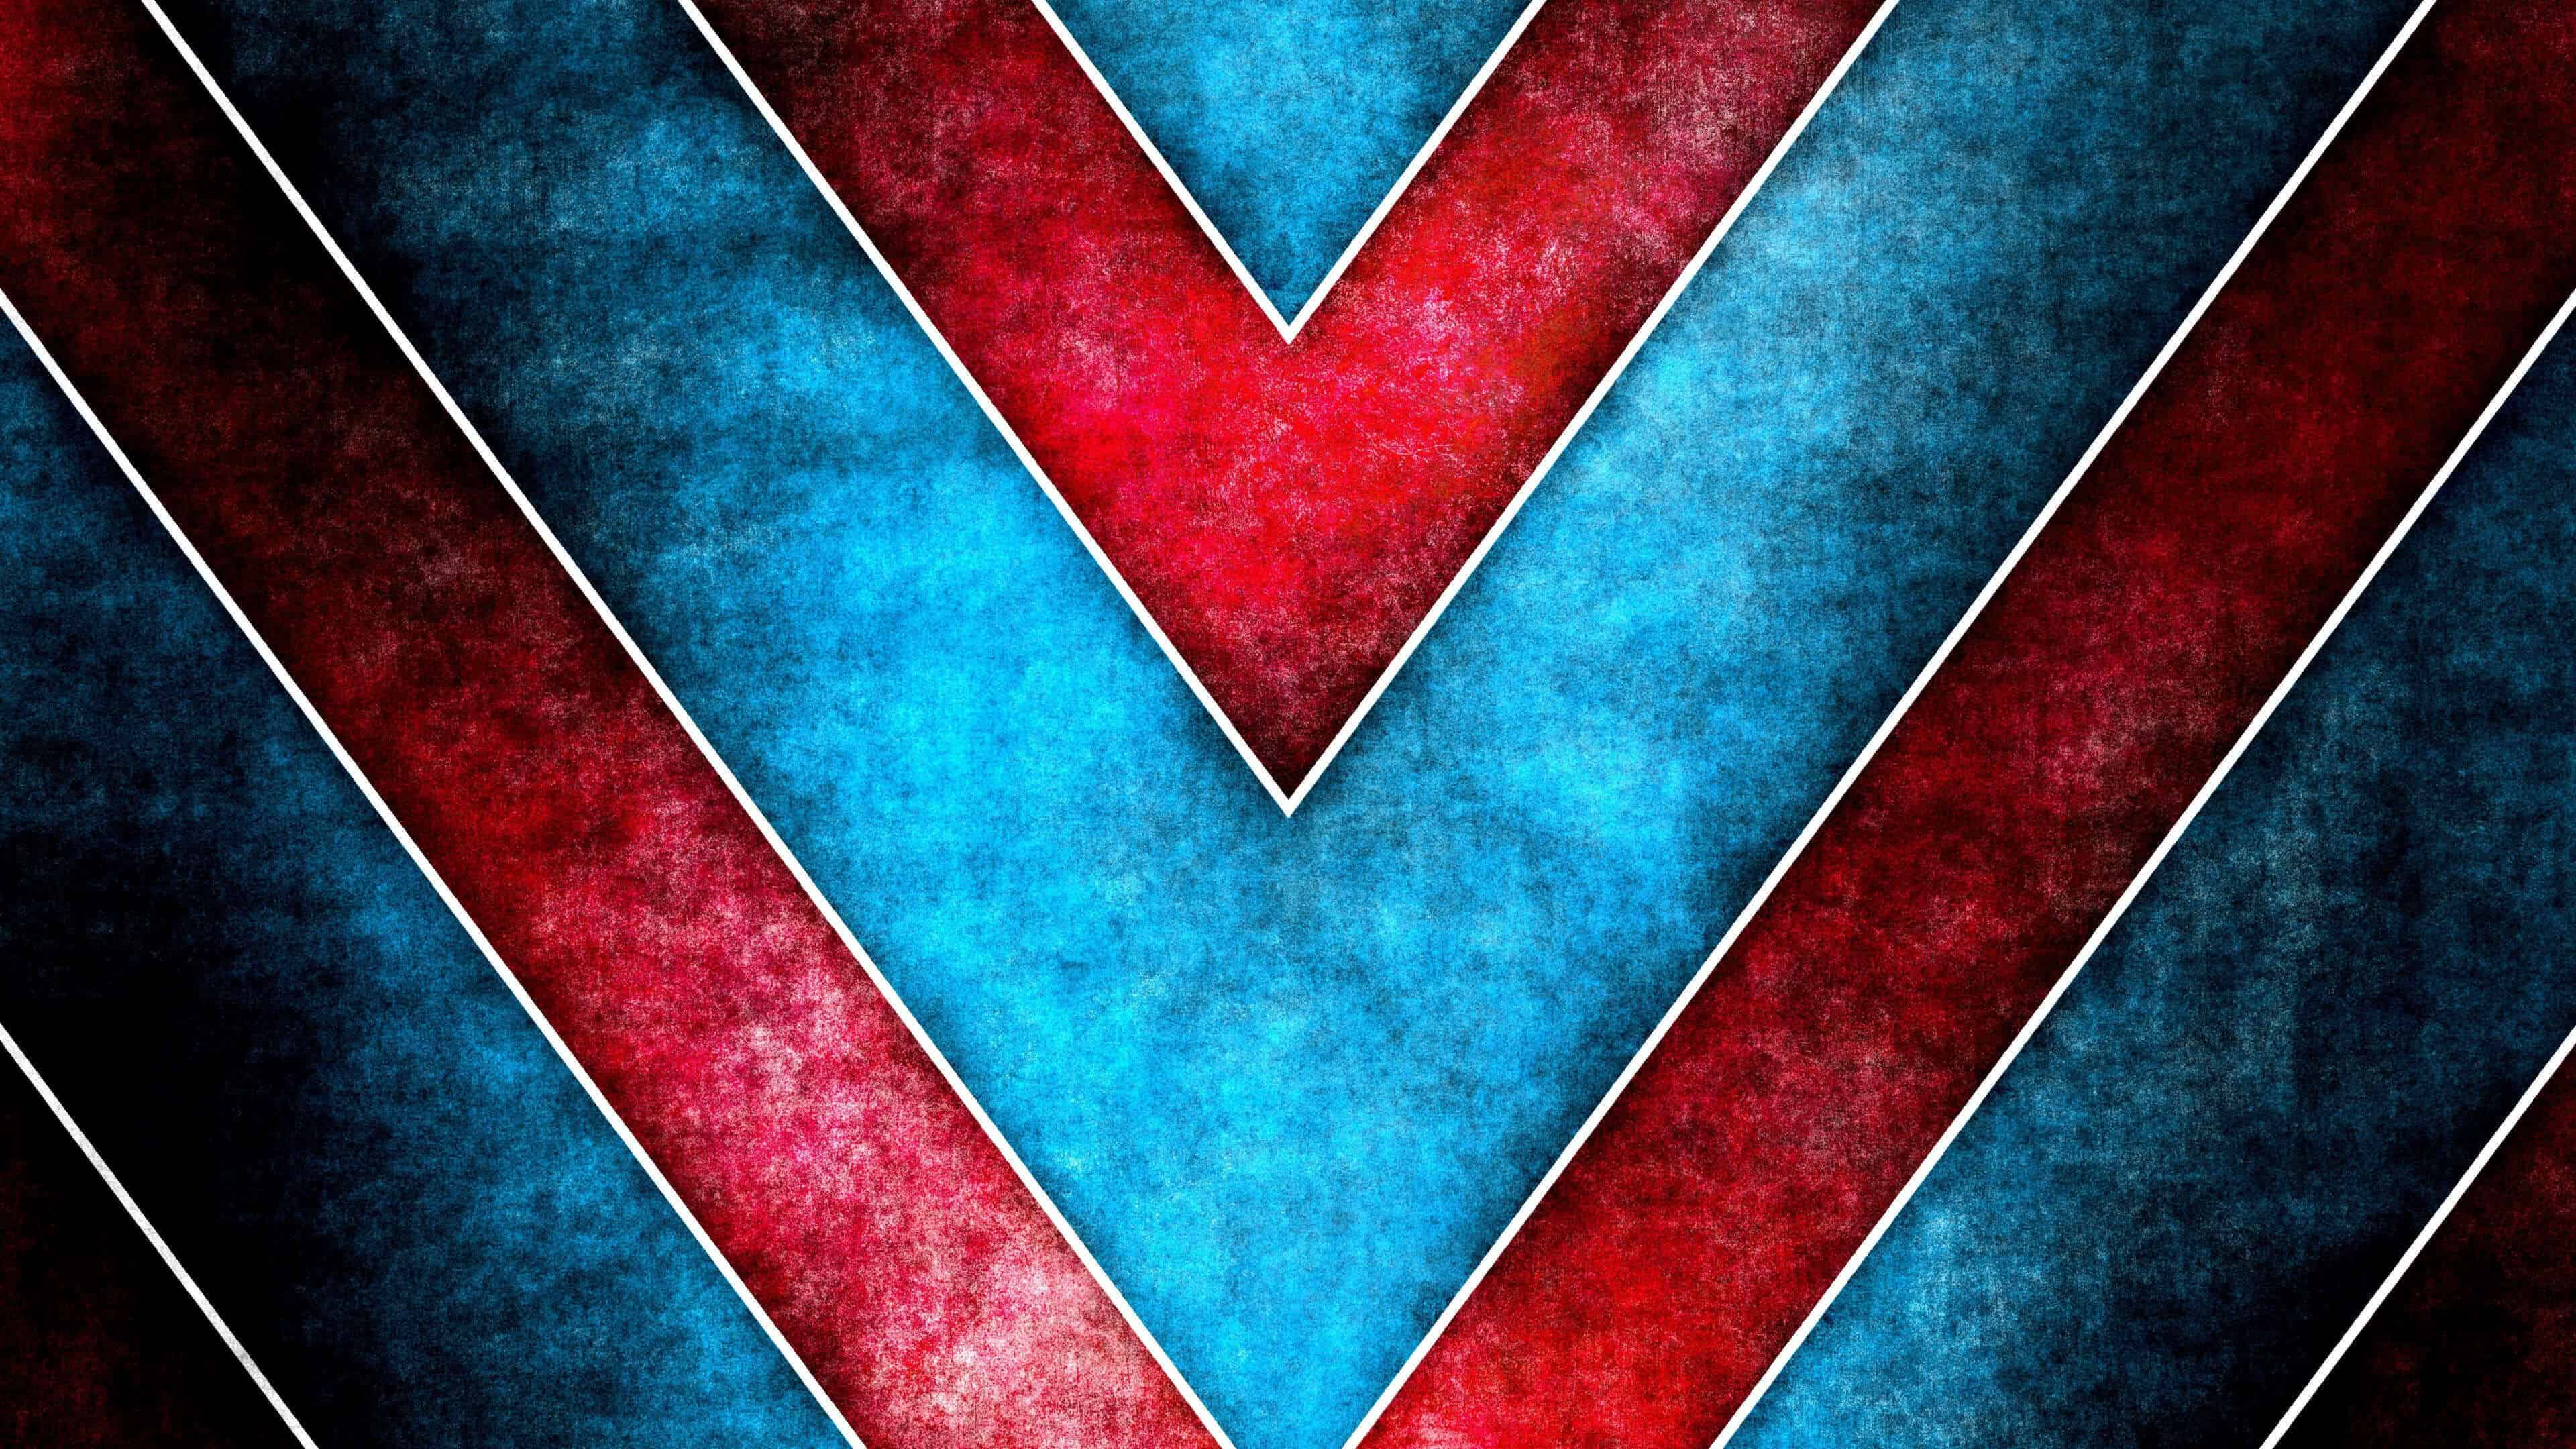 Red And Blue Triangle Pattern UHD 4K Wallpaper | Pixelz